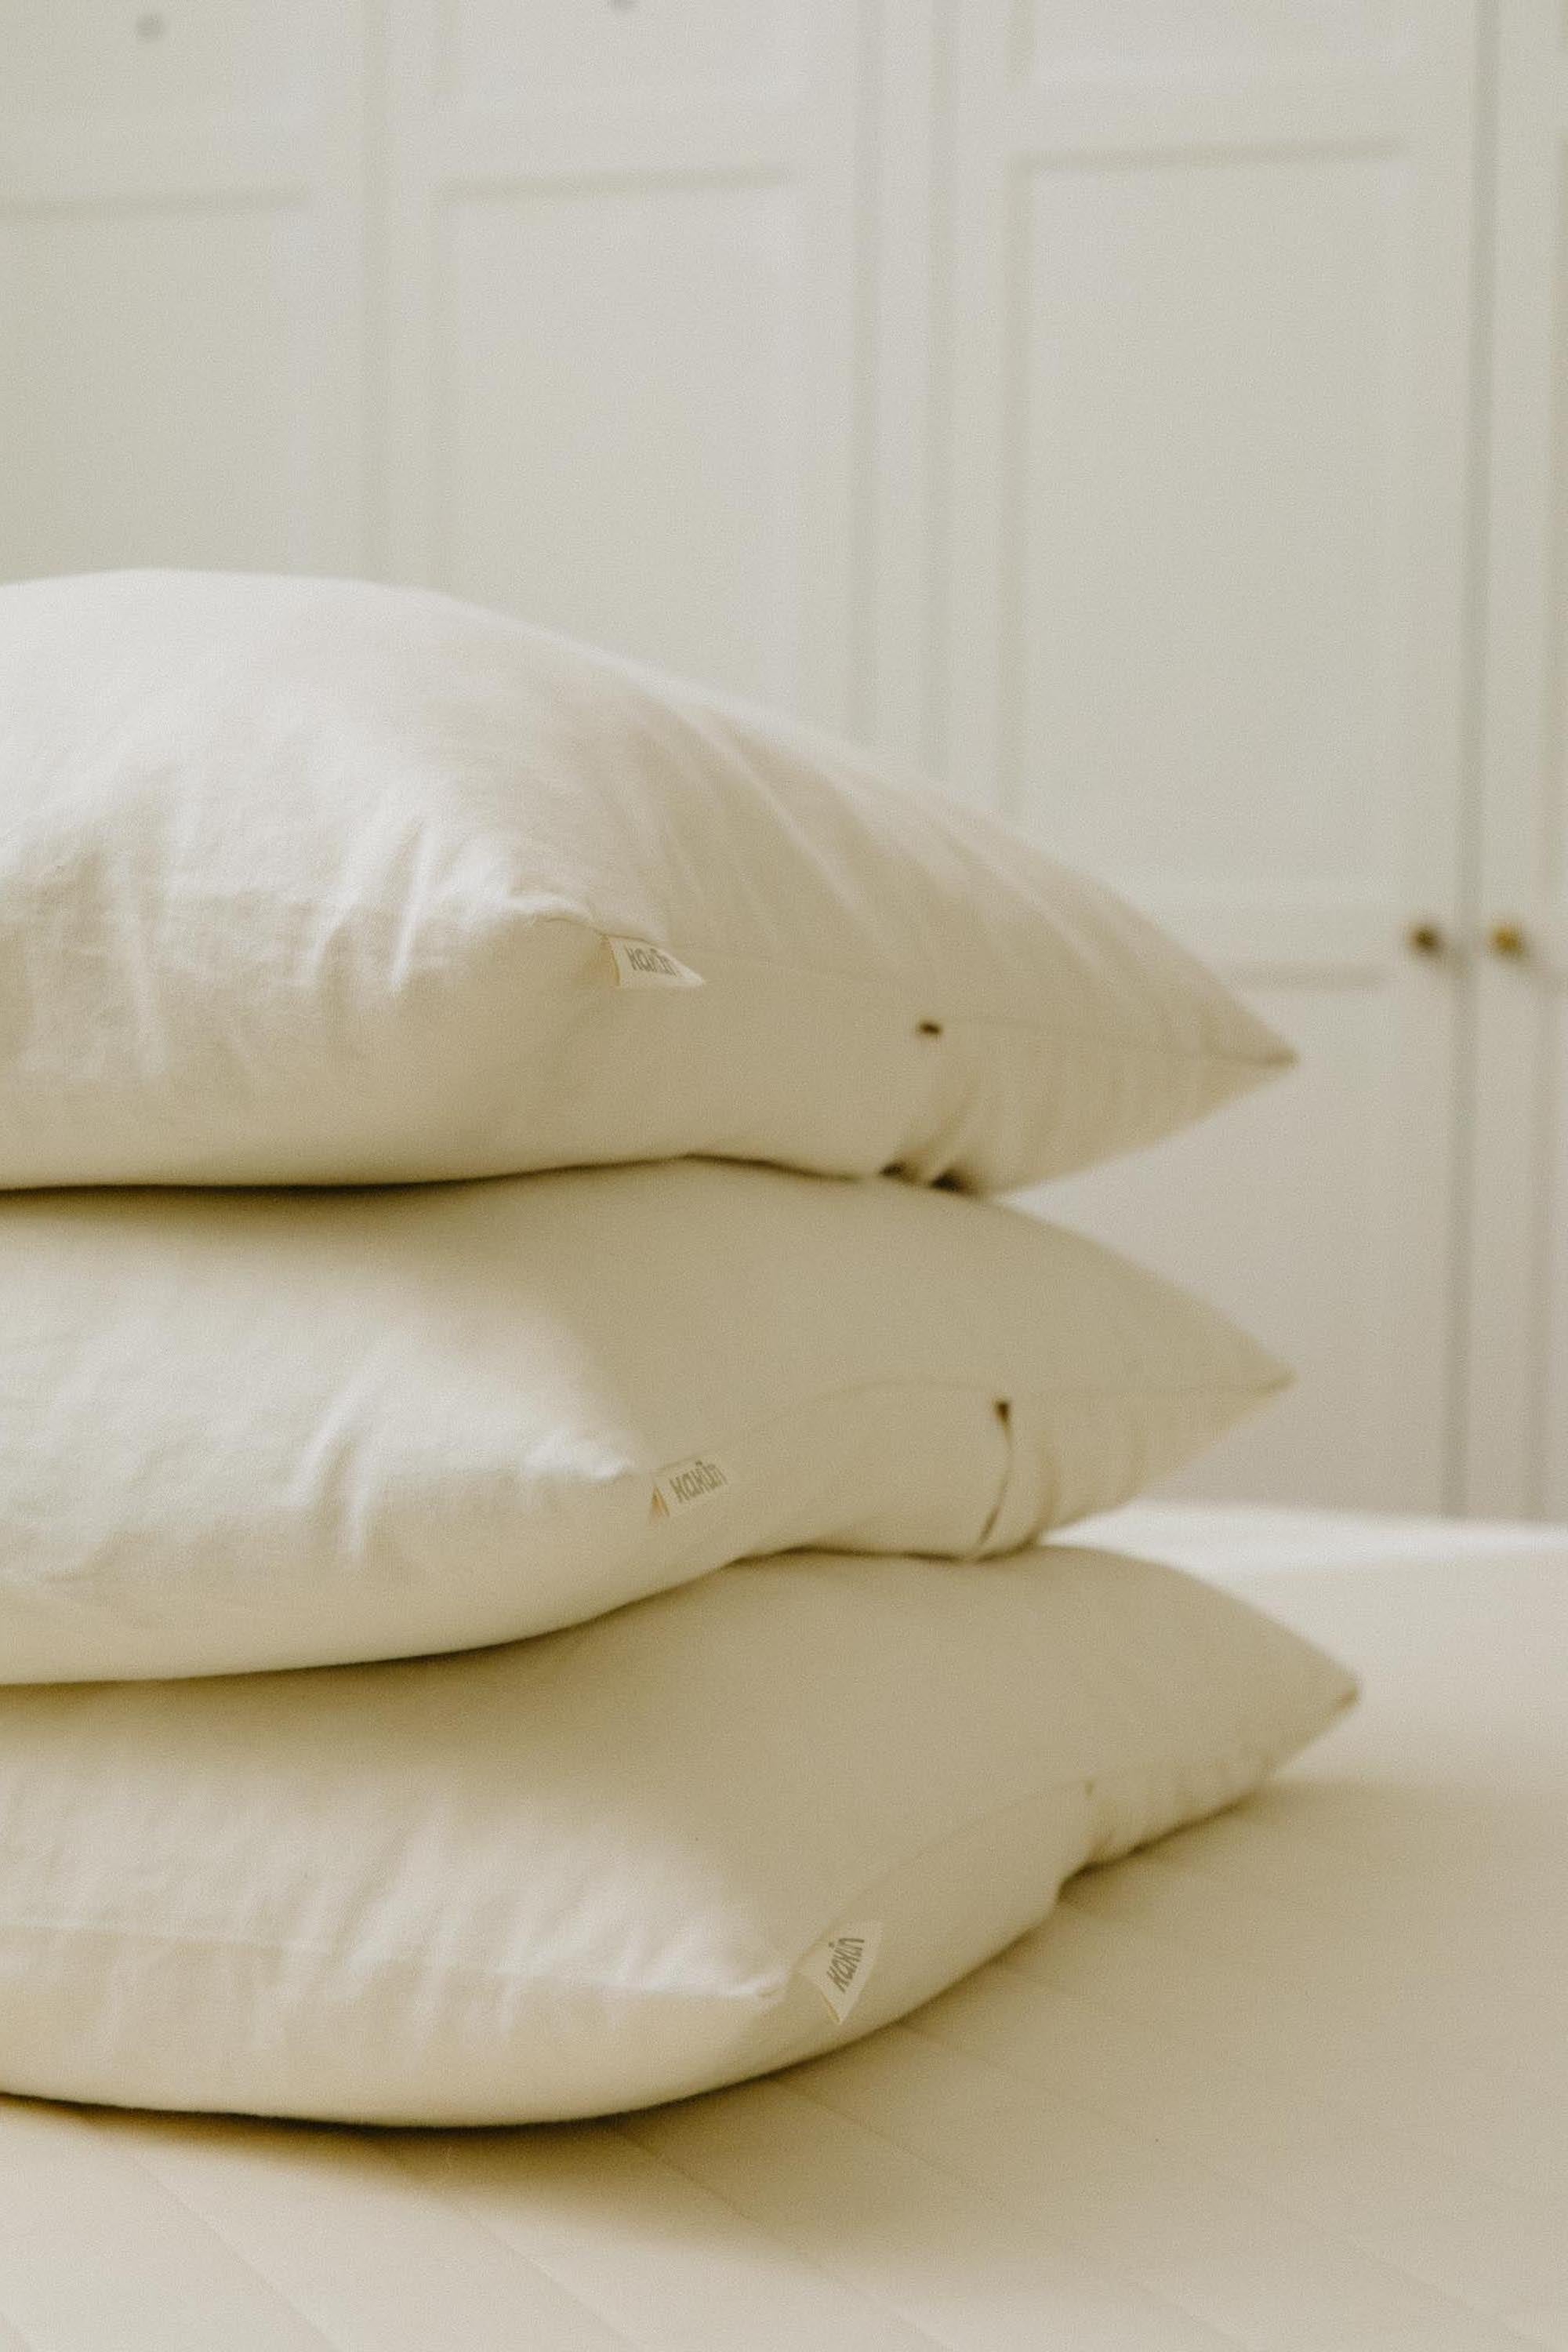 Organic pillow collection from Resthouse. Organic head pillows and travel pillows made from natural eco wool, shredded latex, and organic wool.